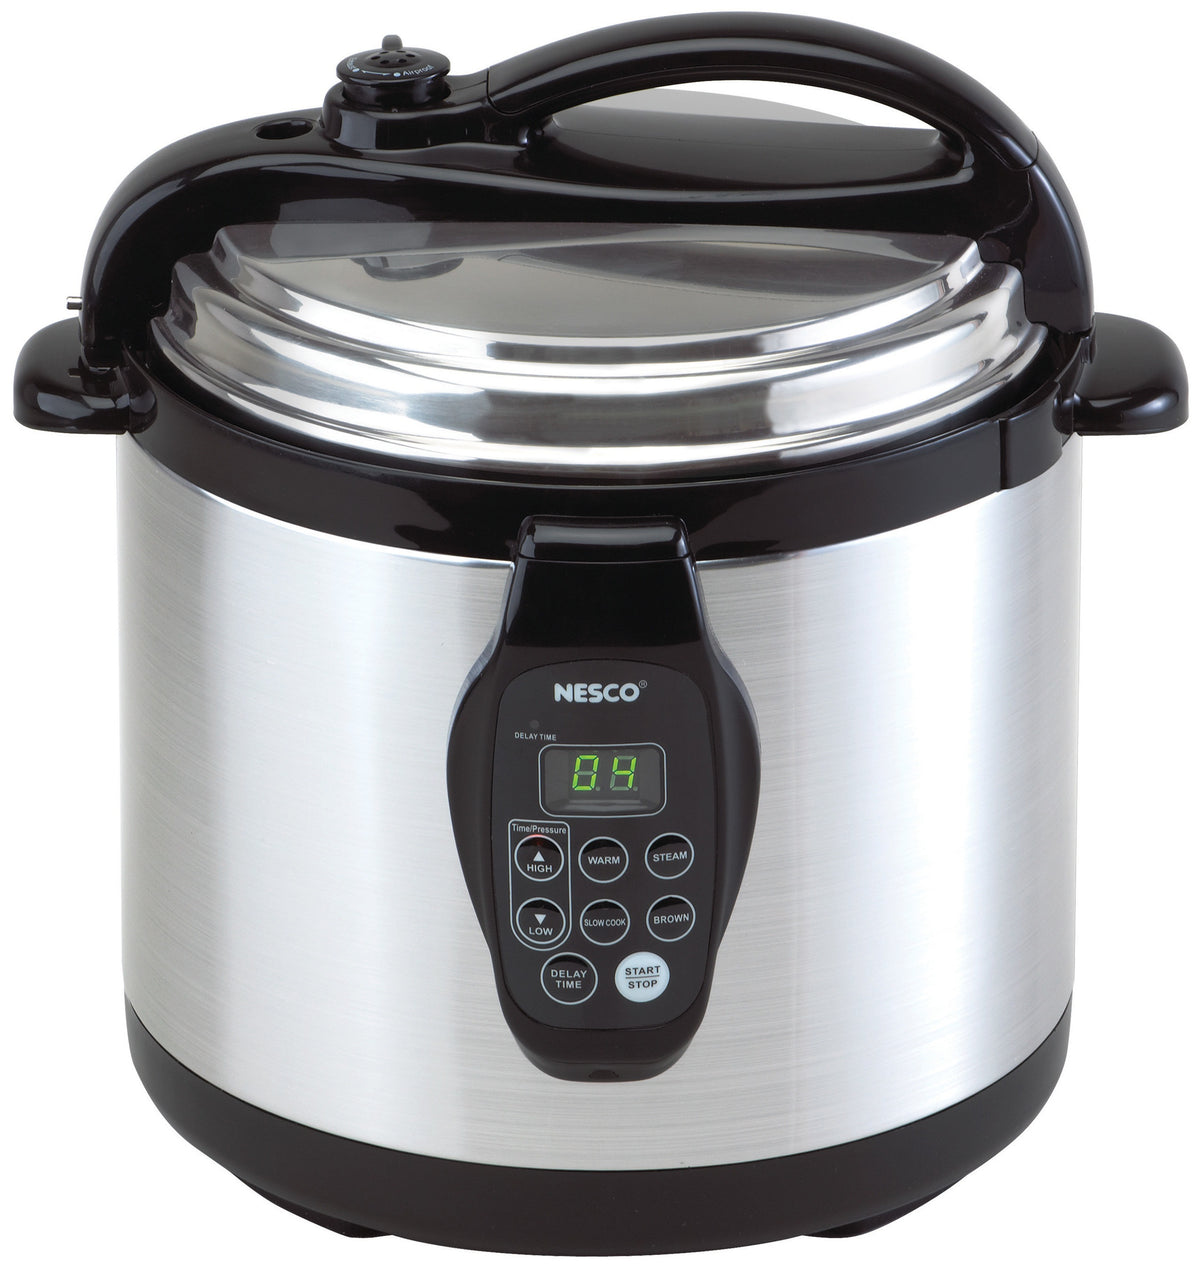 buy pressure cookers & canners at cheap rate in bulk. wholesale & retail kitchen materials store.